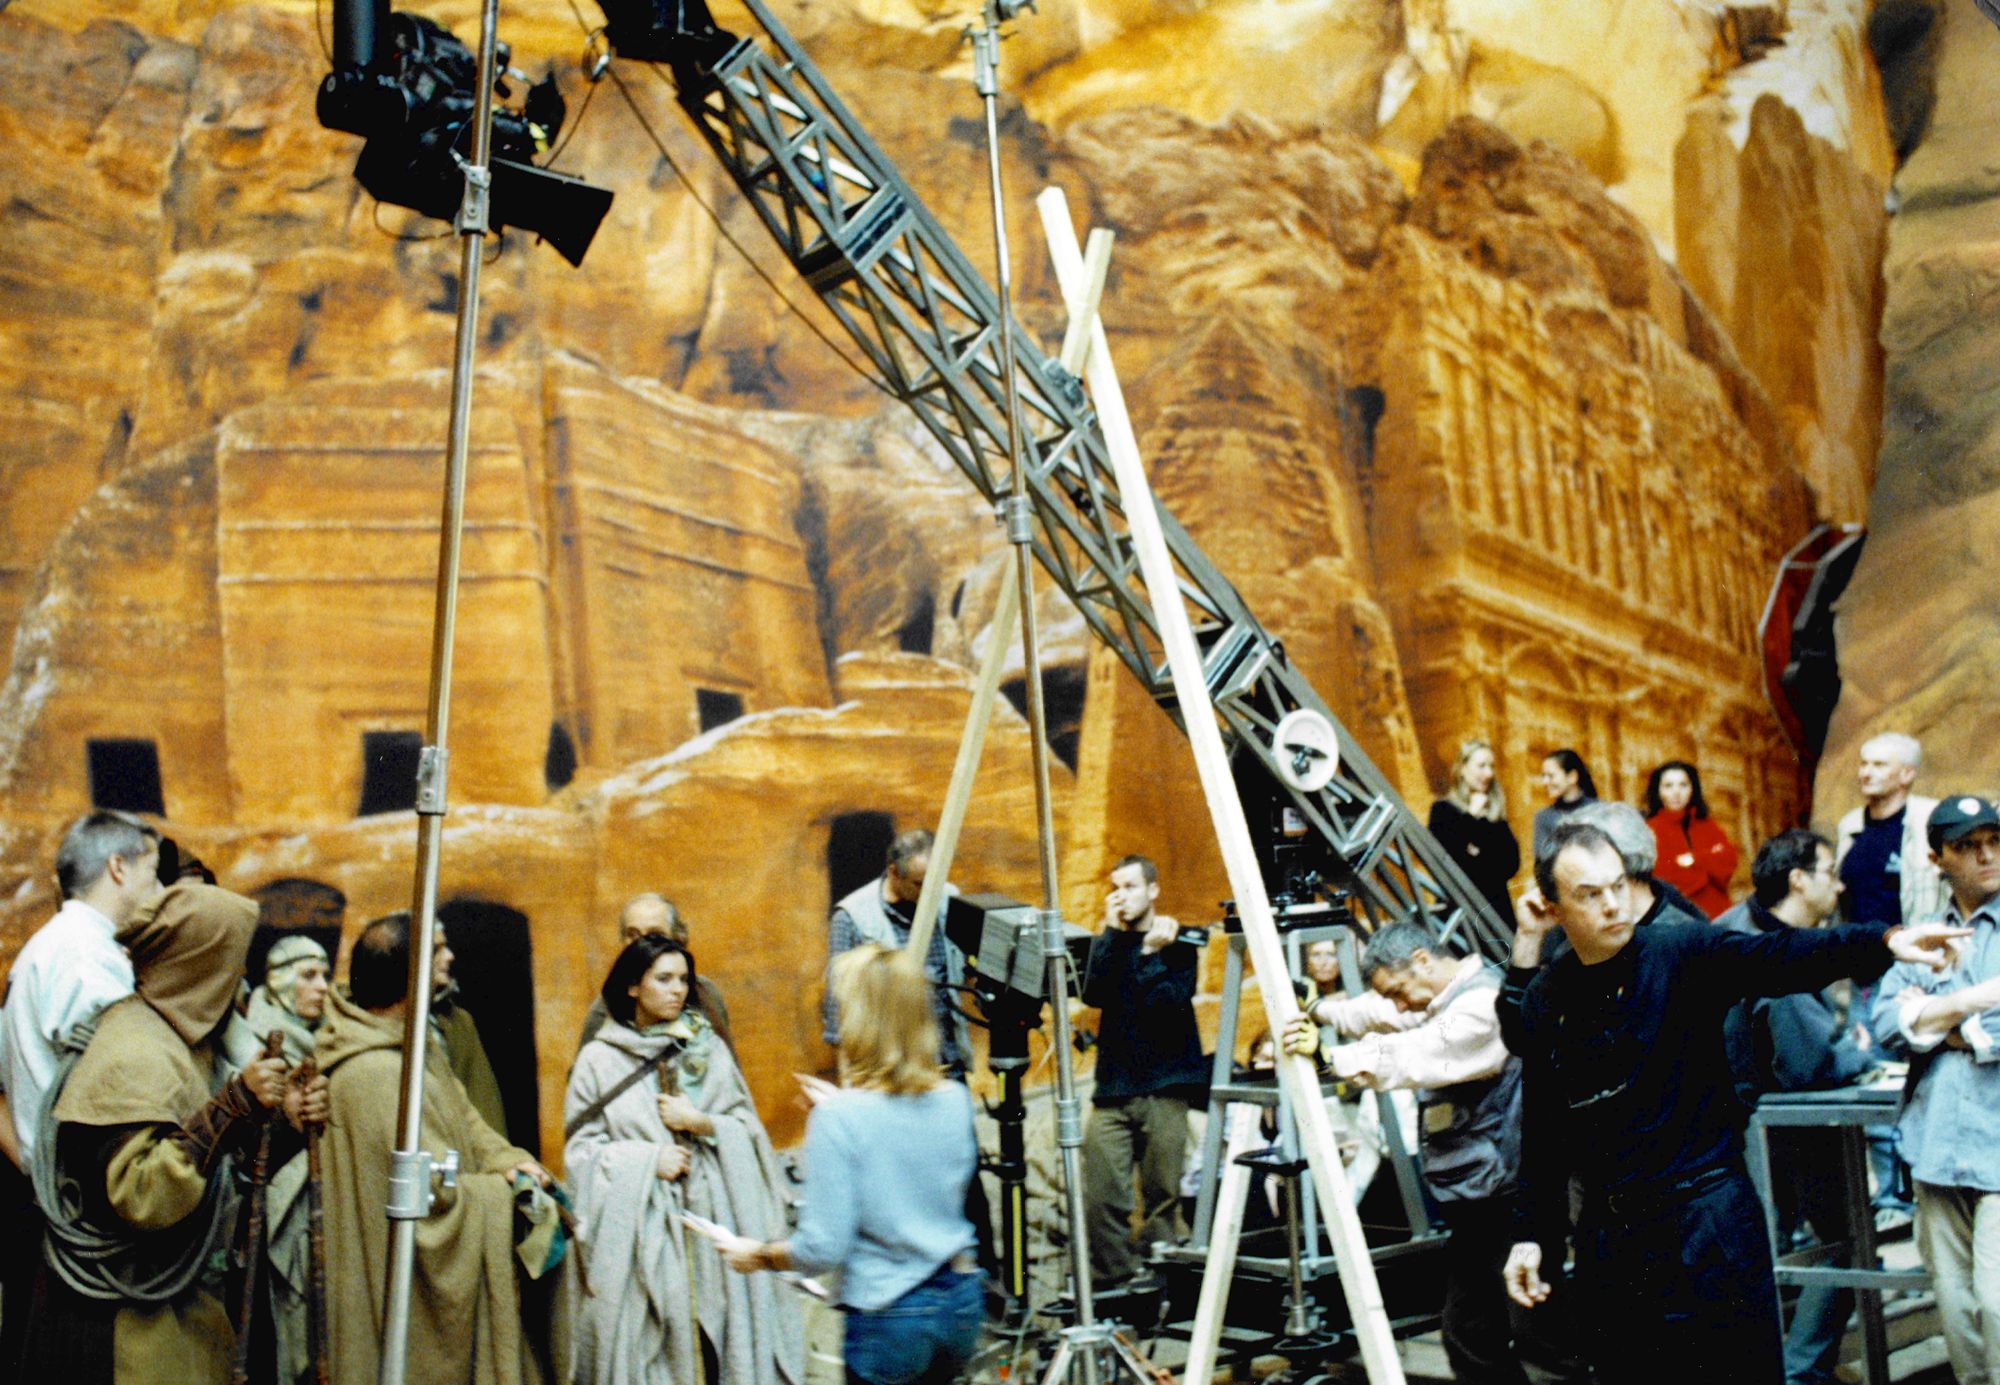 Director John Harrison, wearing b lack, points off camera. Behind him are extras in desert garb and a backdrop showing dwellings cut into a desert rockface.